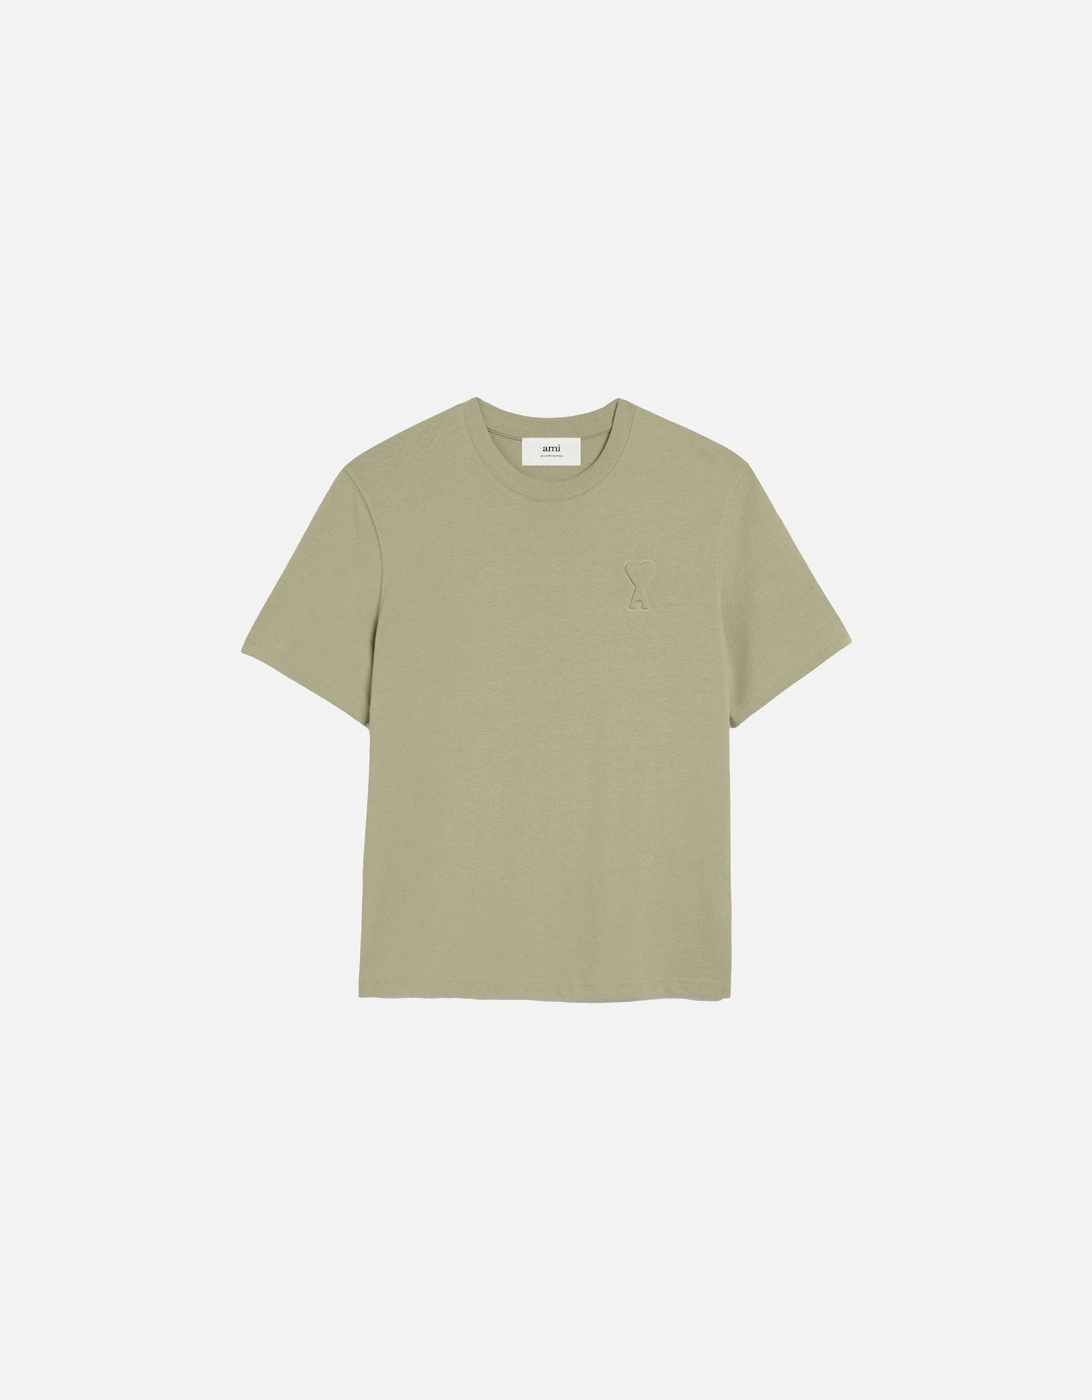 ADC Cotton T-shirt Beige, 7 of 6